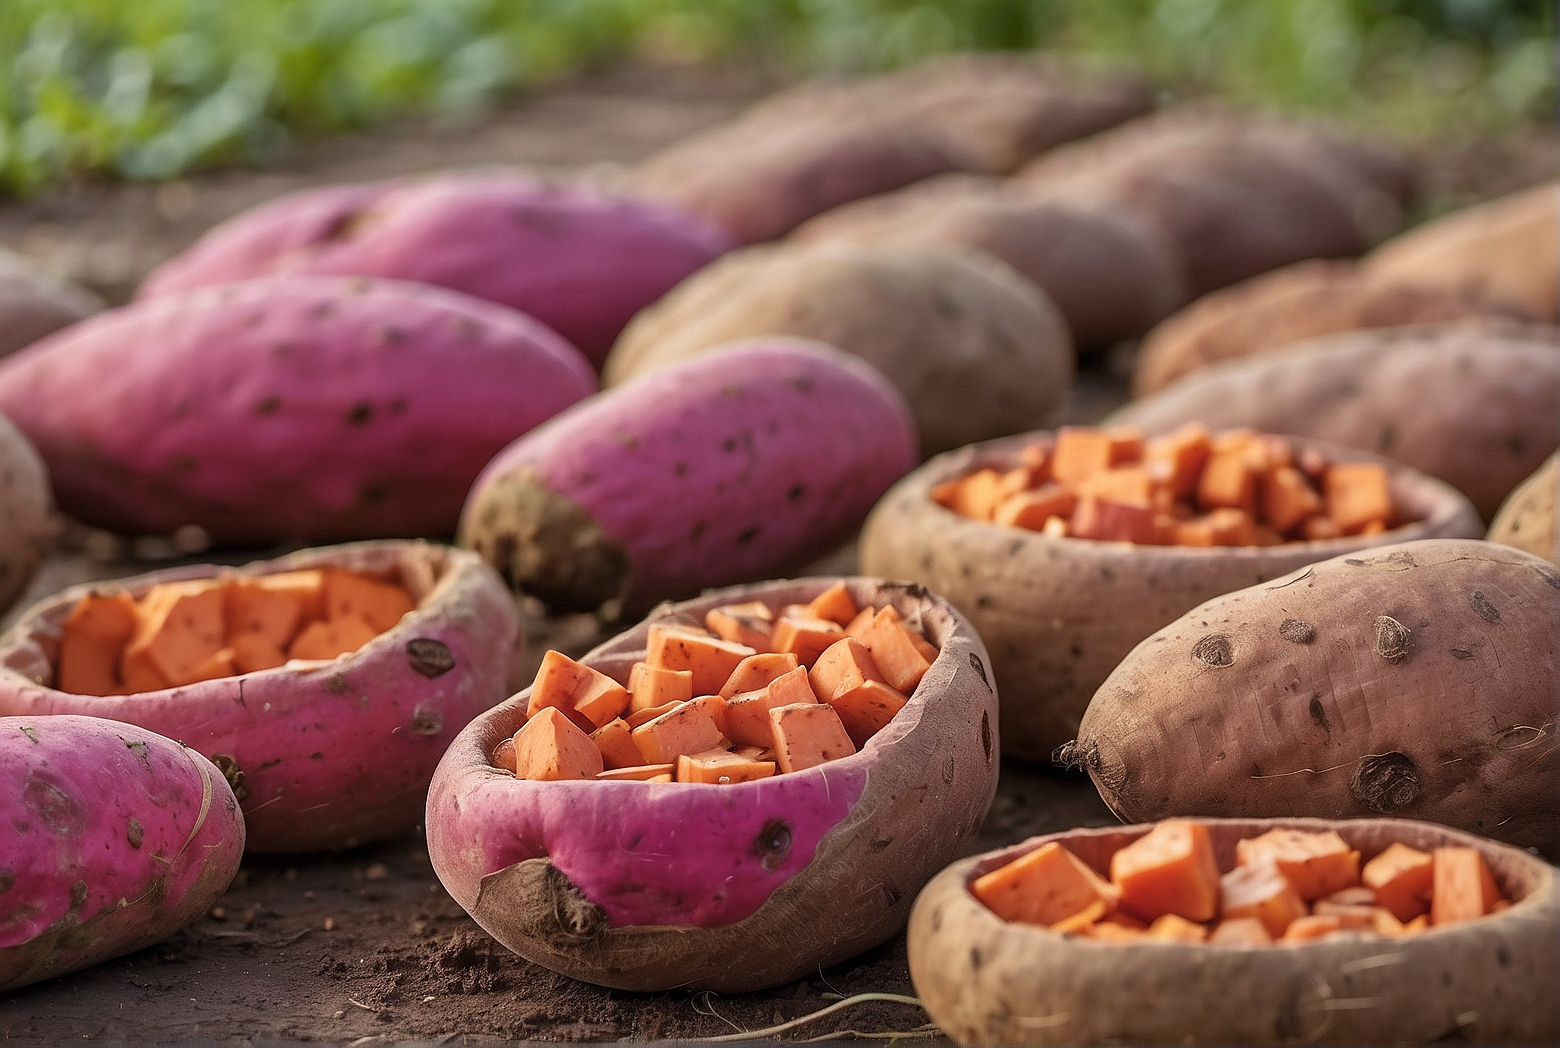 Default What is the growth habit of sweet potatoes 1